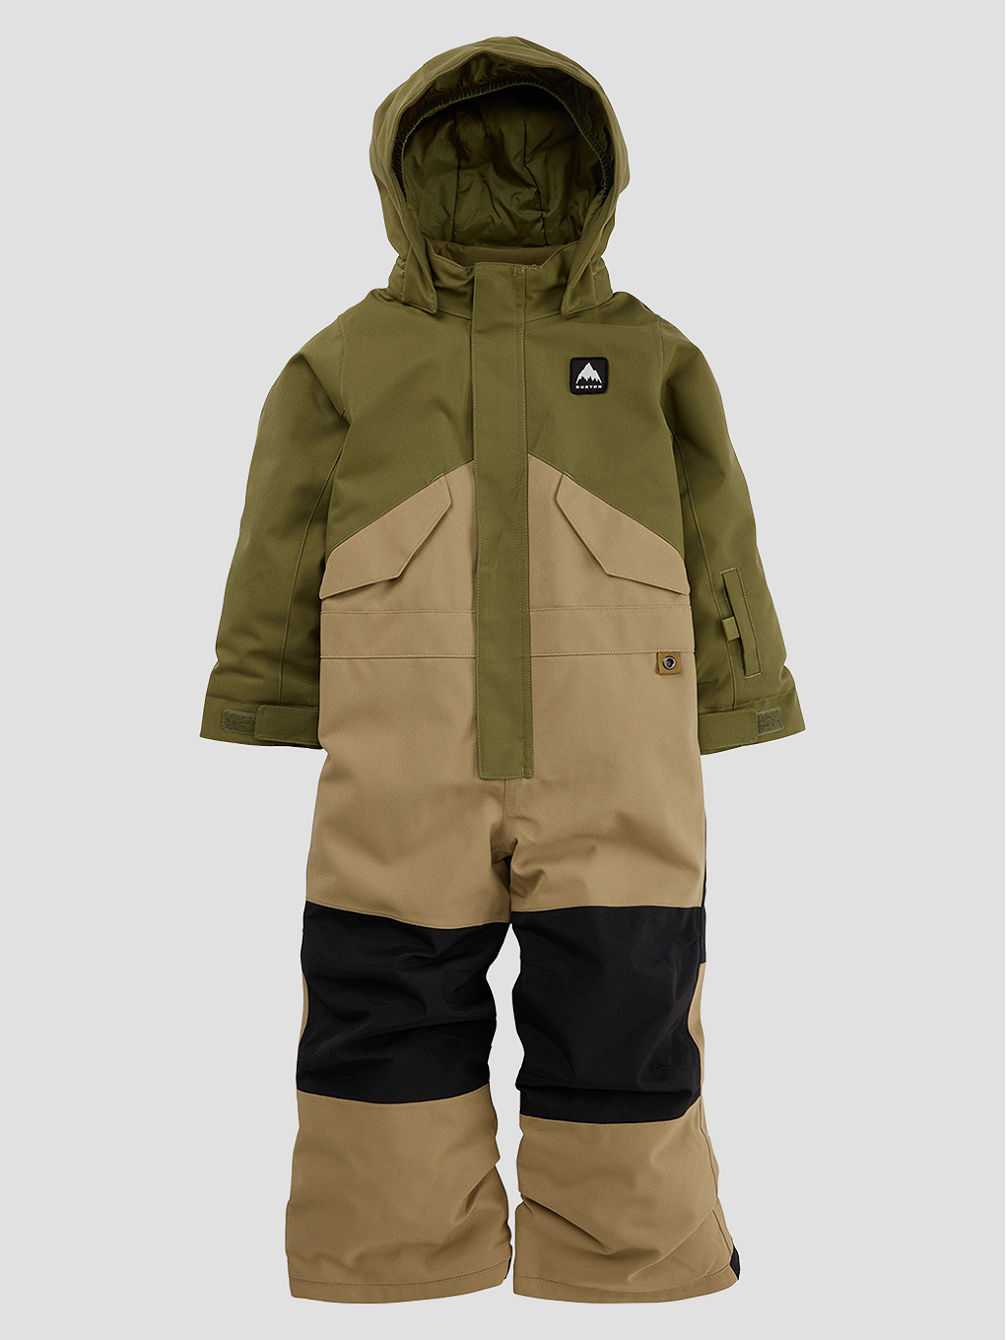 Toddlers 2L One Piece Combinaison